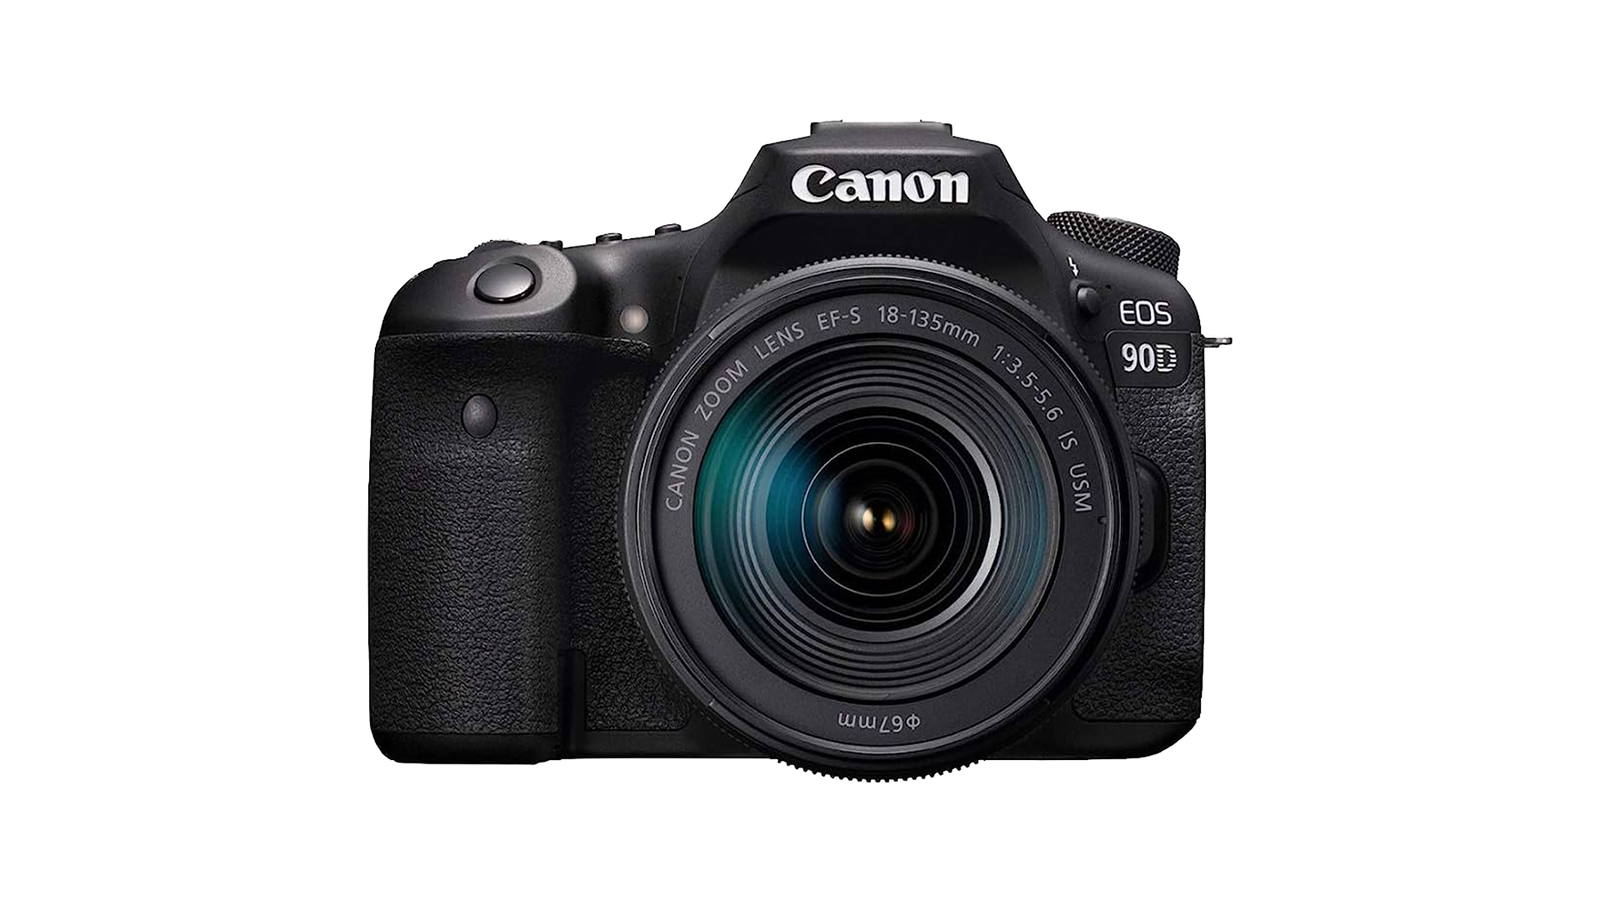 Canon EOS 90D - A large DSLR with traditional handling and great video capabilities